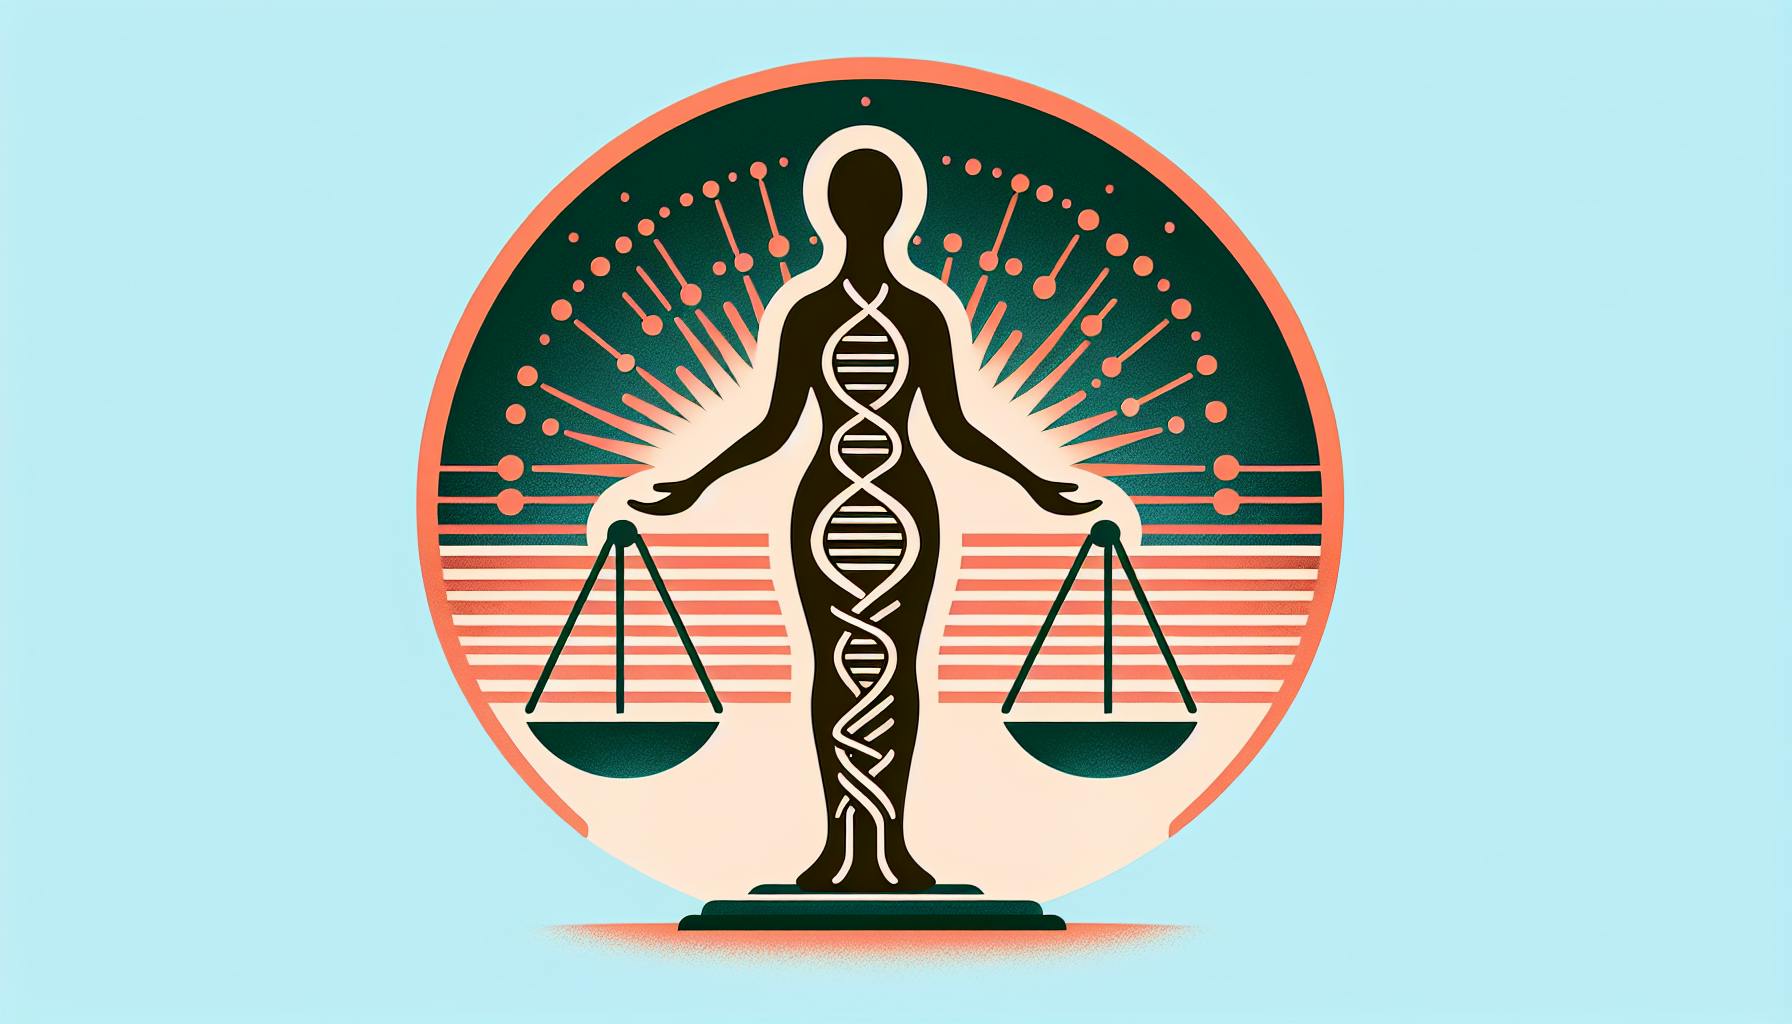 The Genetic Information Nondiscrimination Act: Law Explained